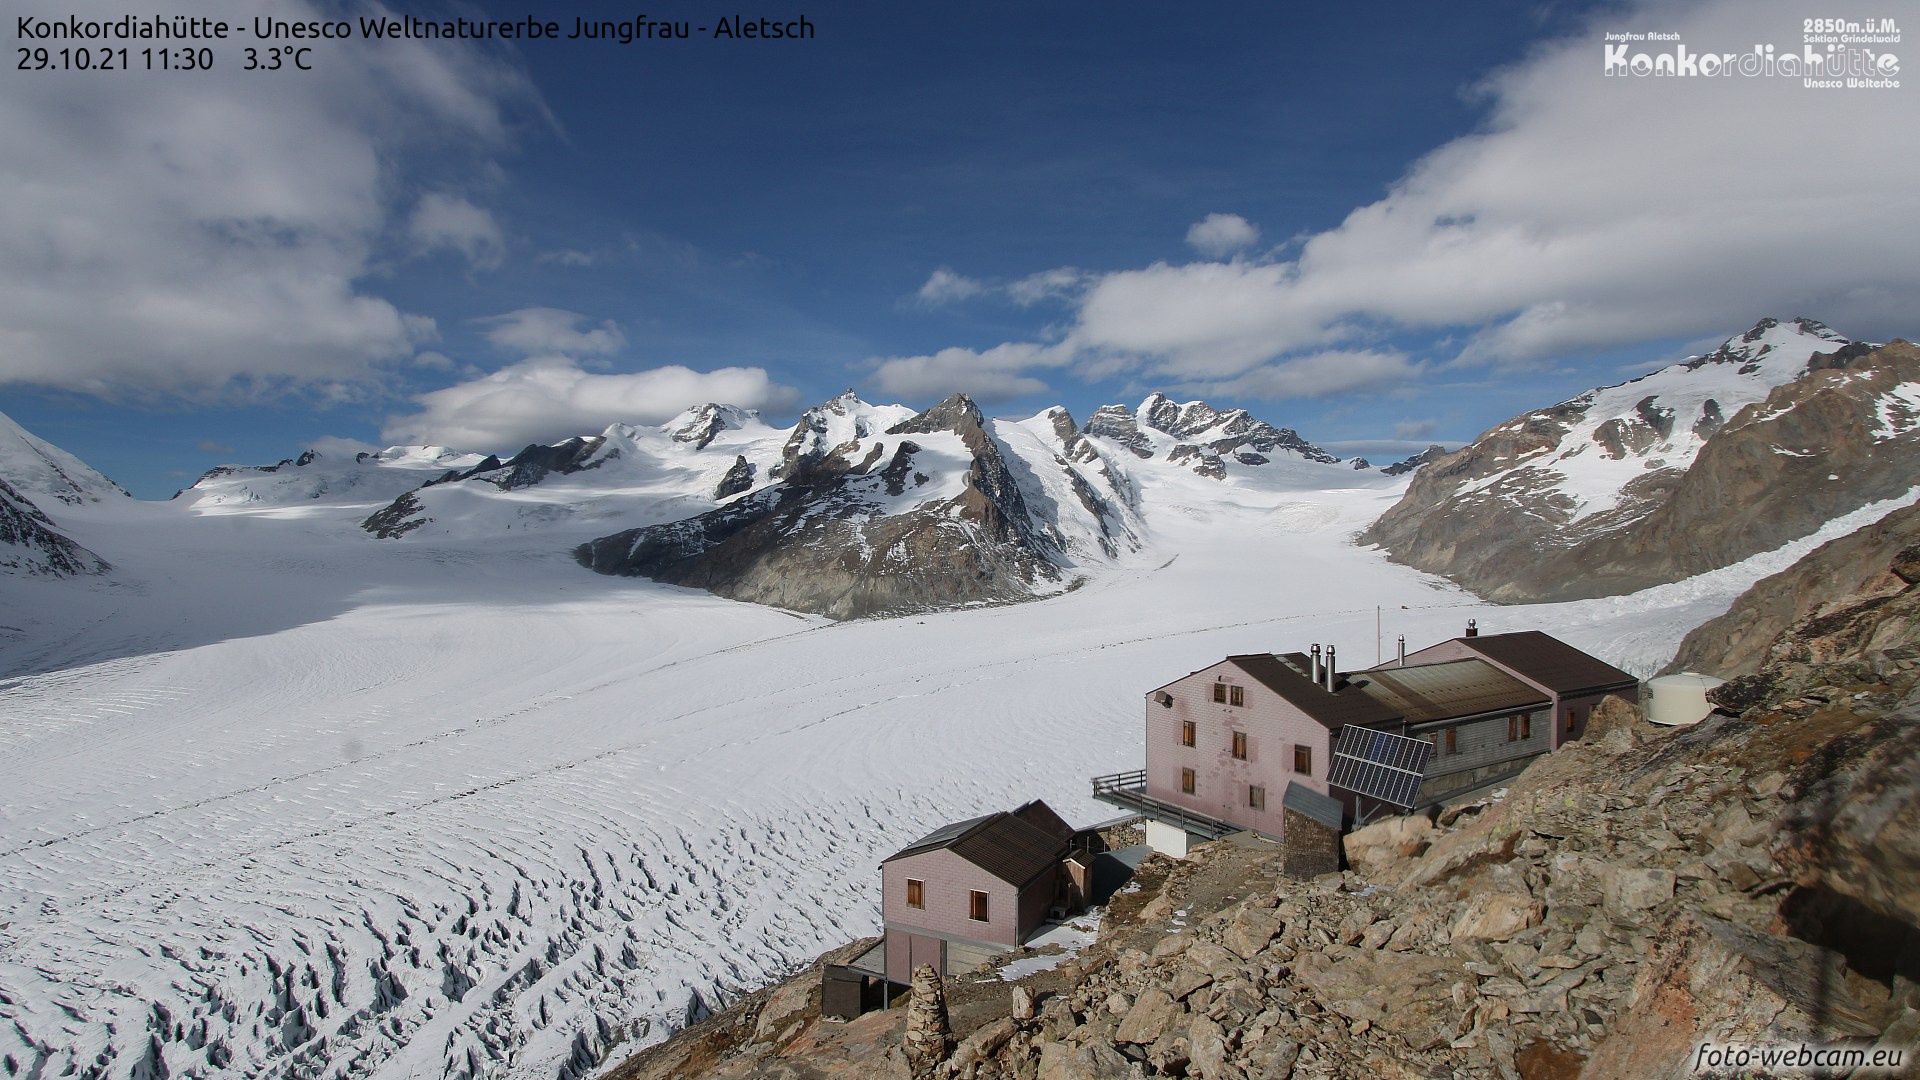 Very little snow in the Alps at the moment, also here at the Konkordiahütte in Switzerland (foto-webcam.eu)